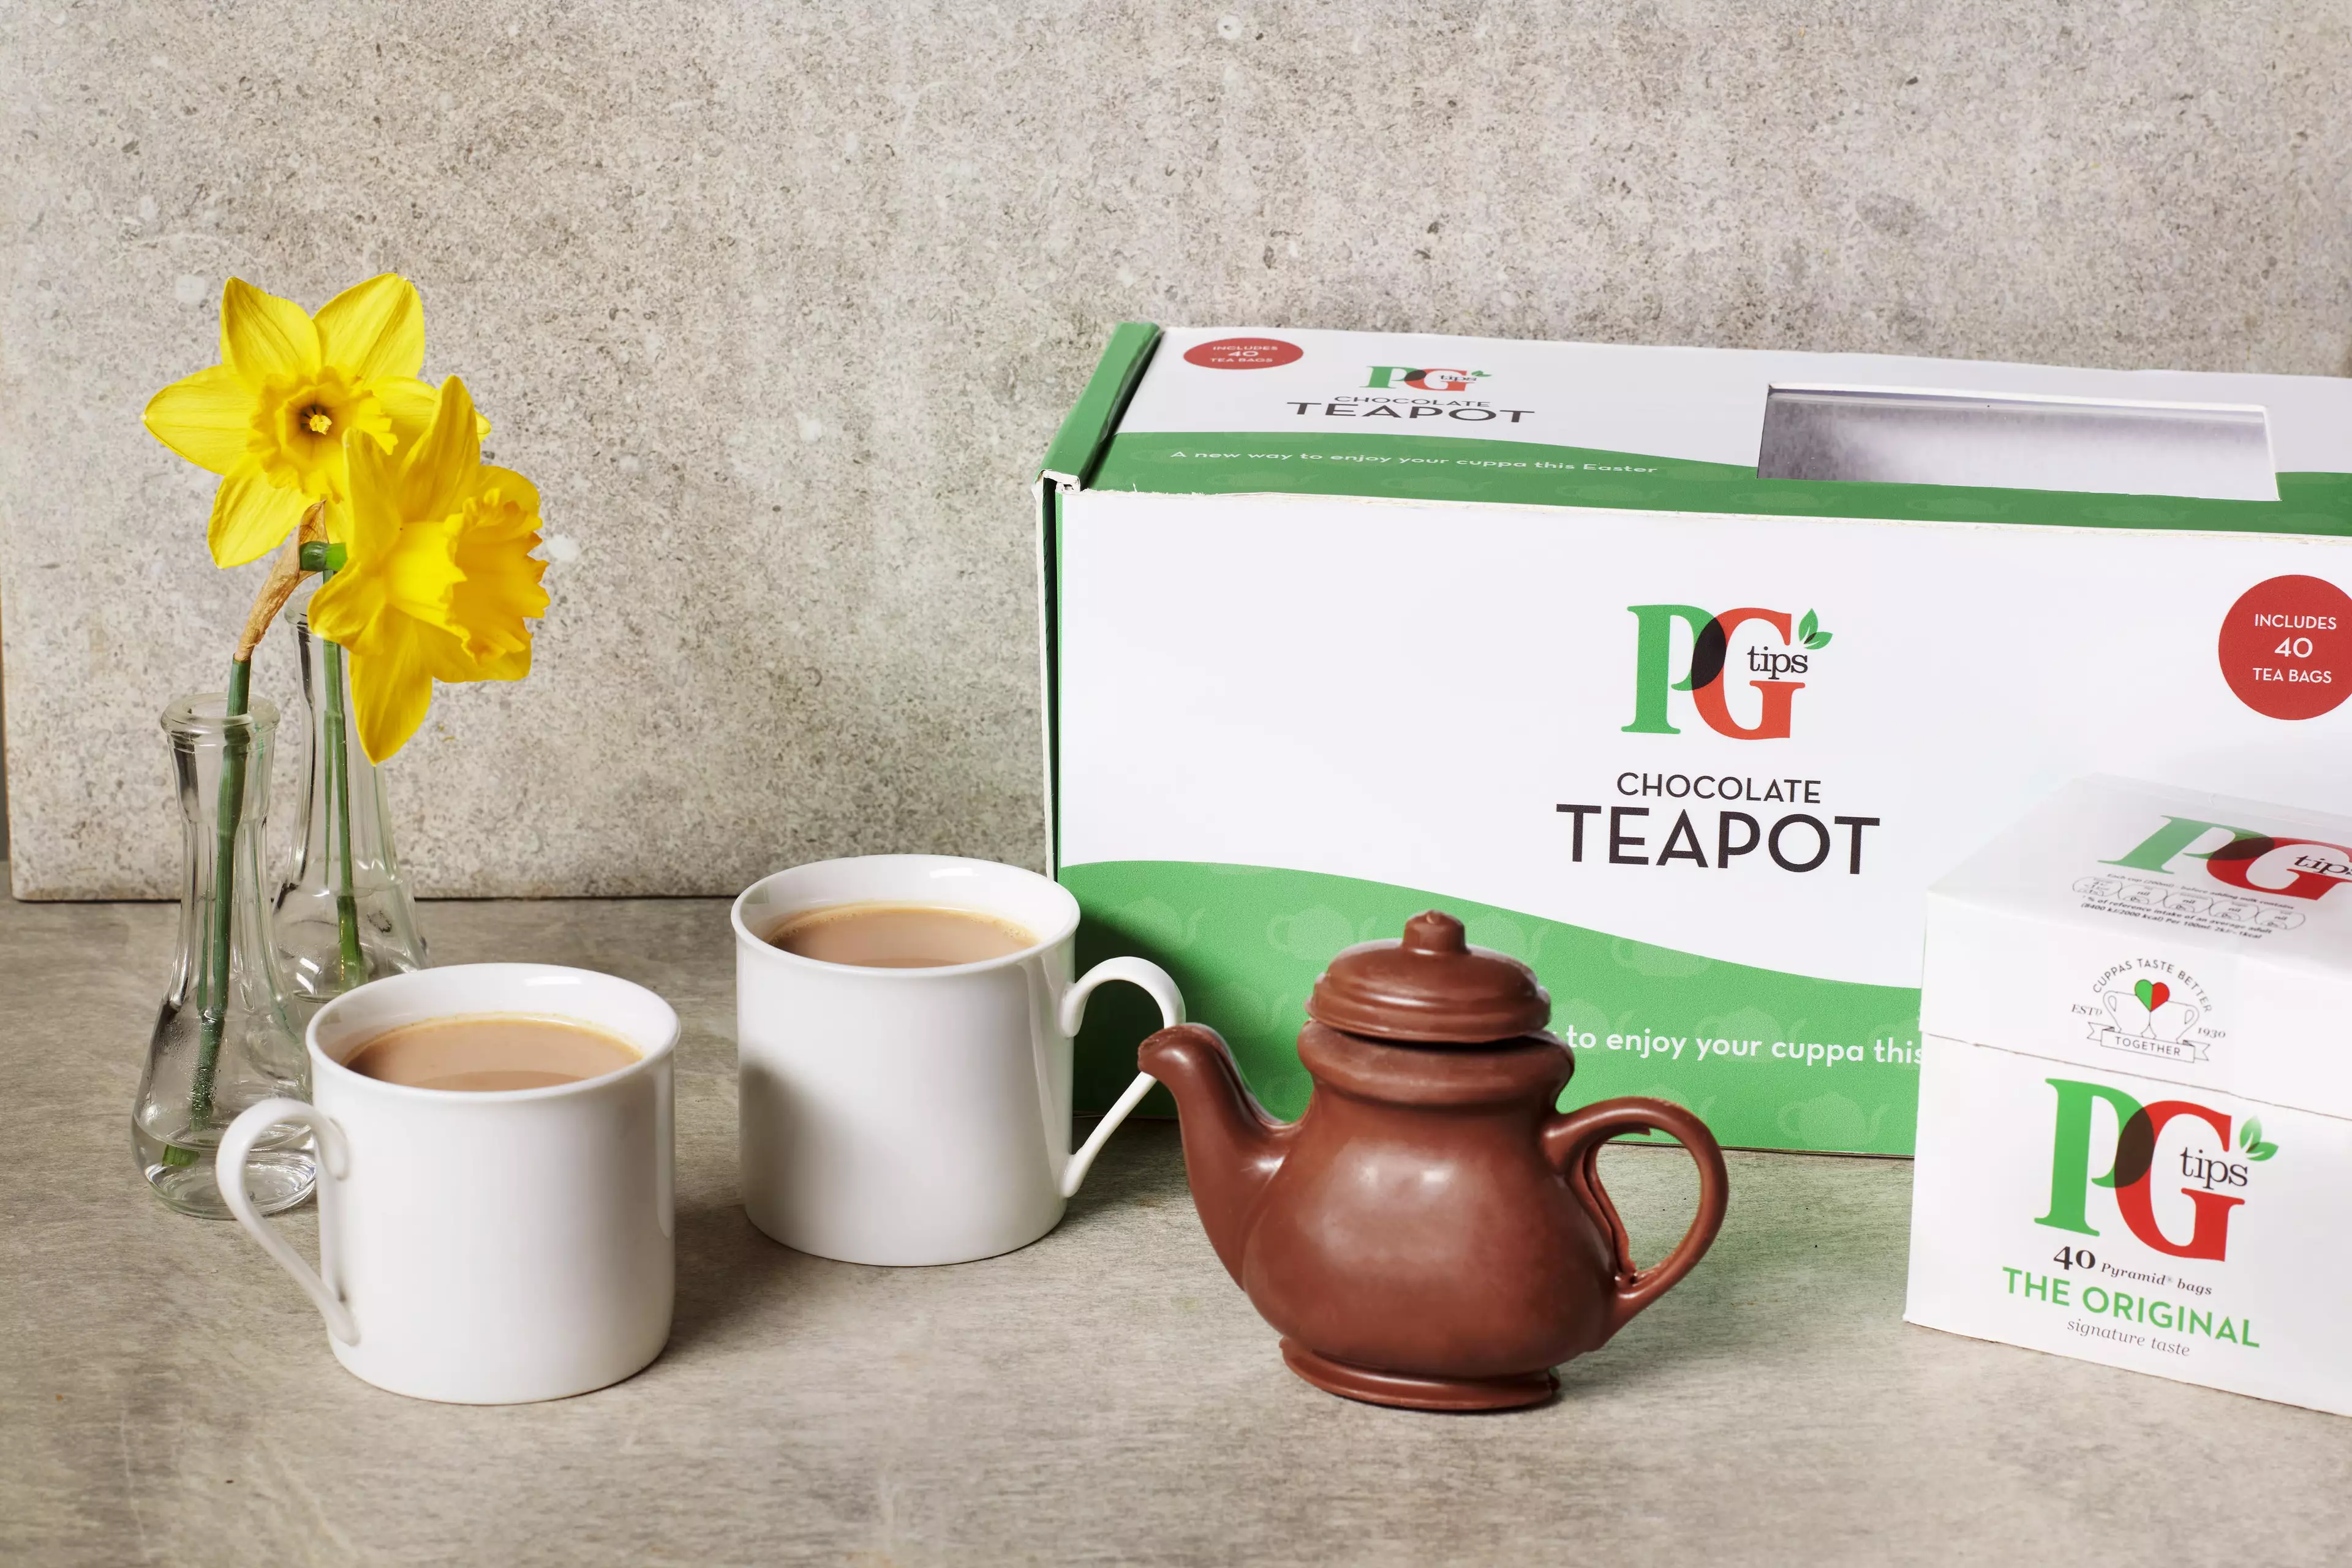 The limited-edition teapots are available to pre-order via the PG tips website, priced at £10 (